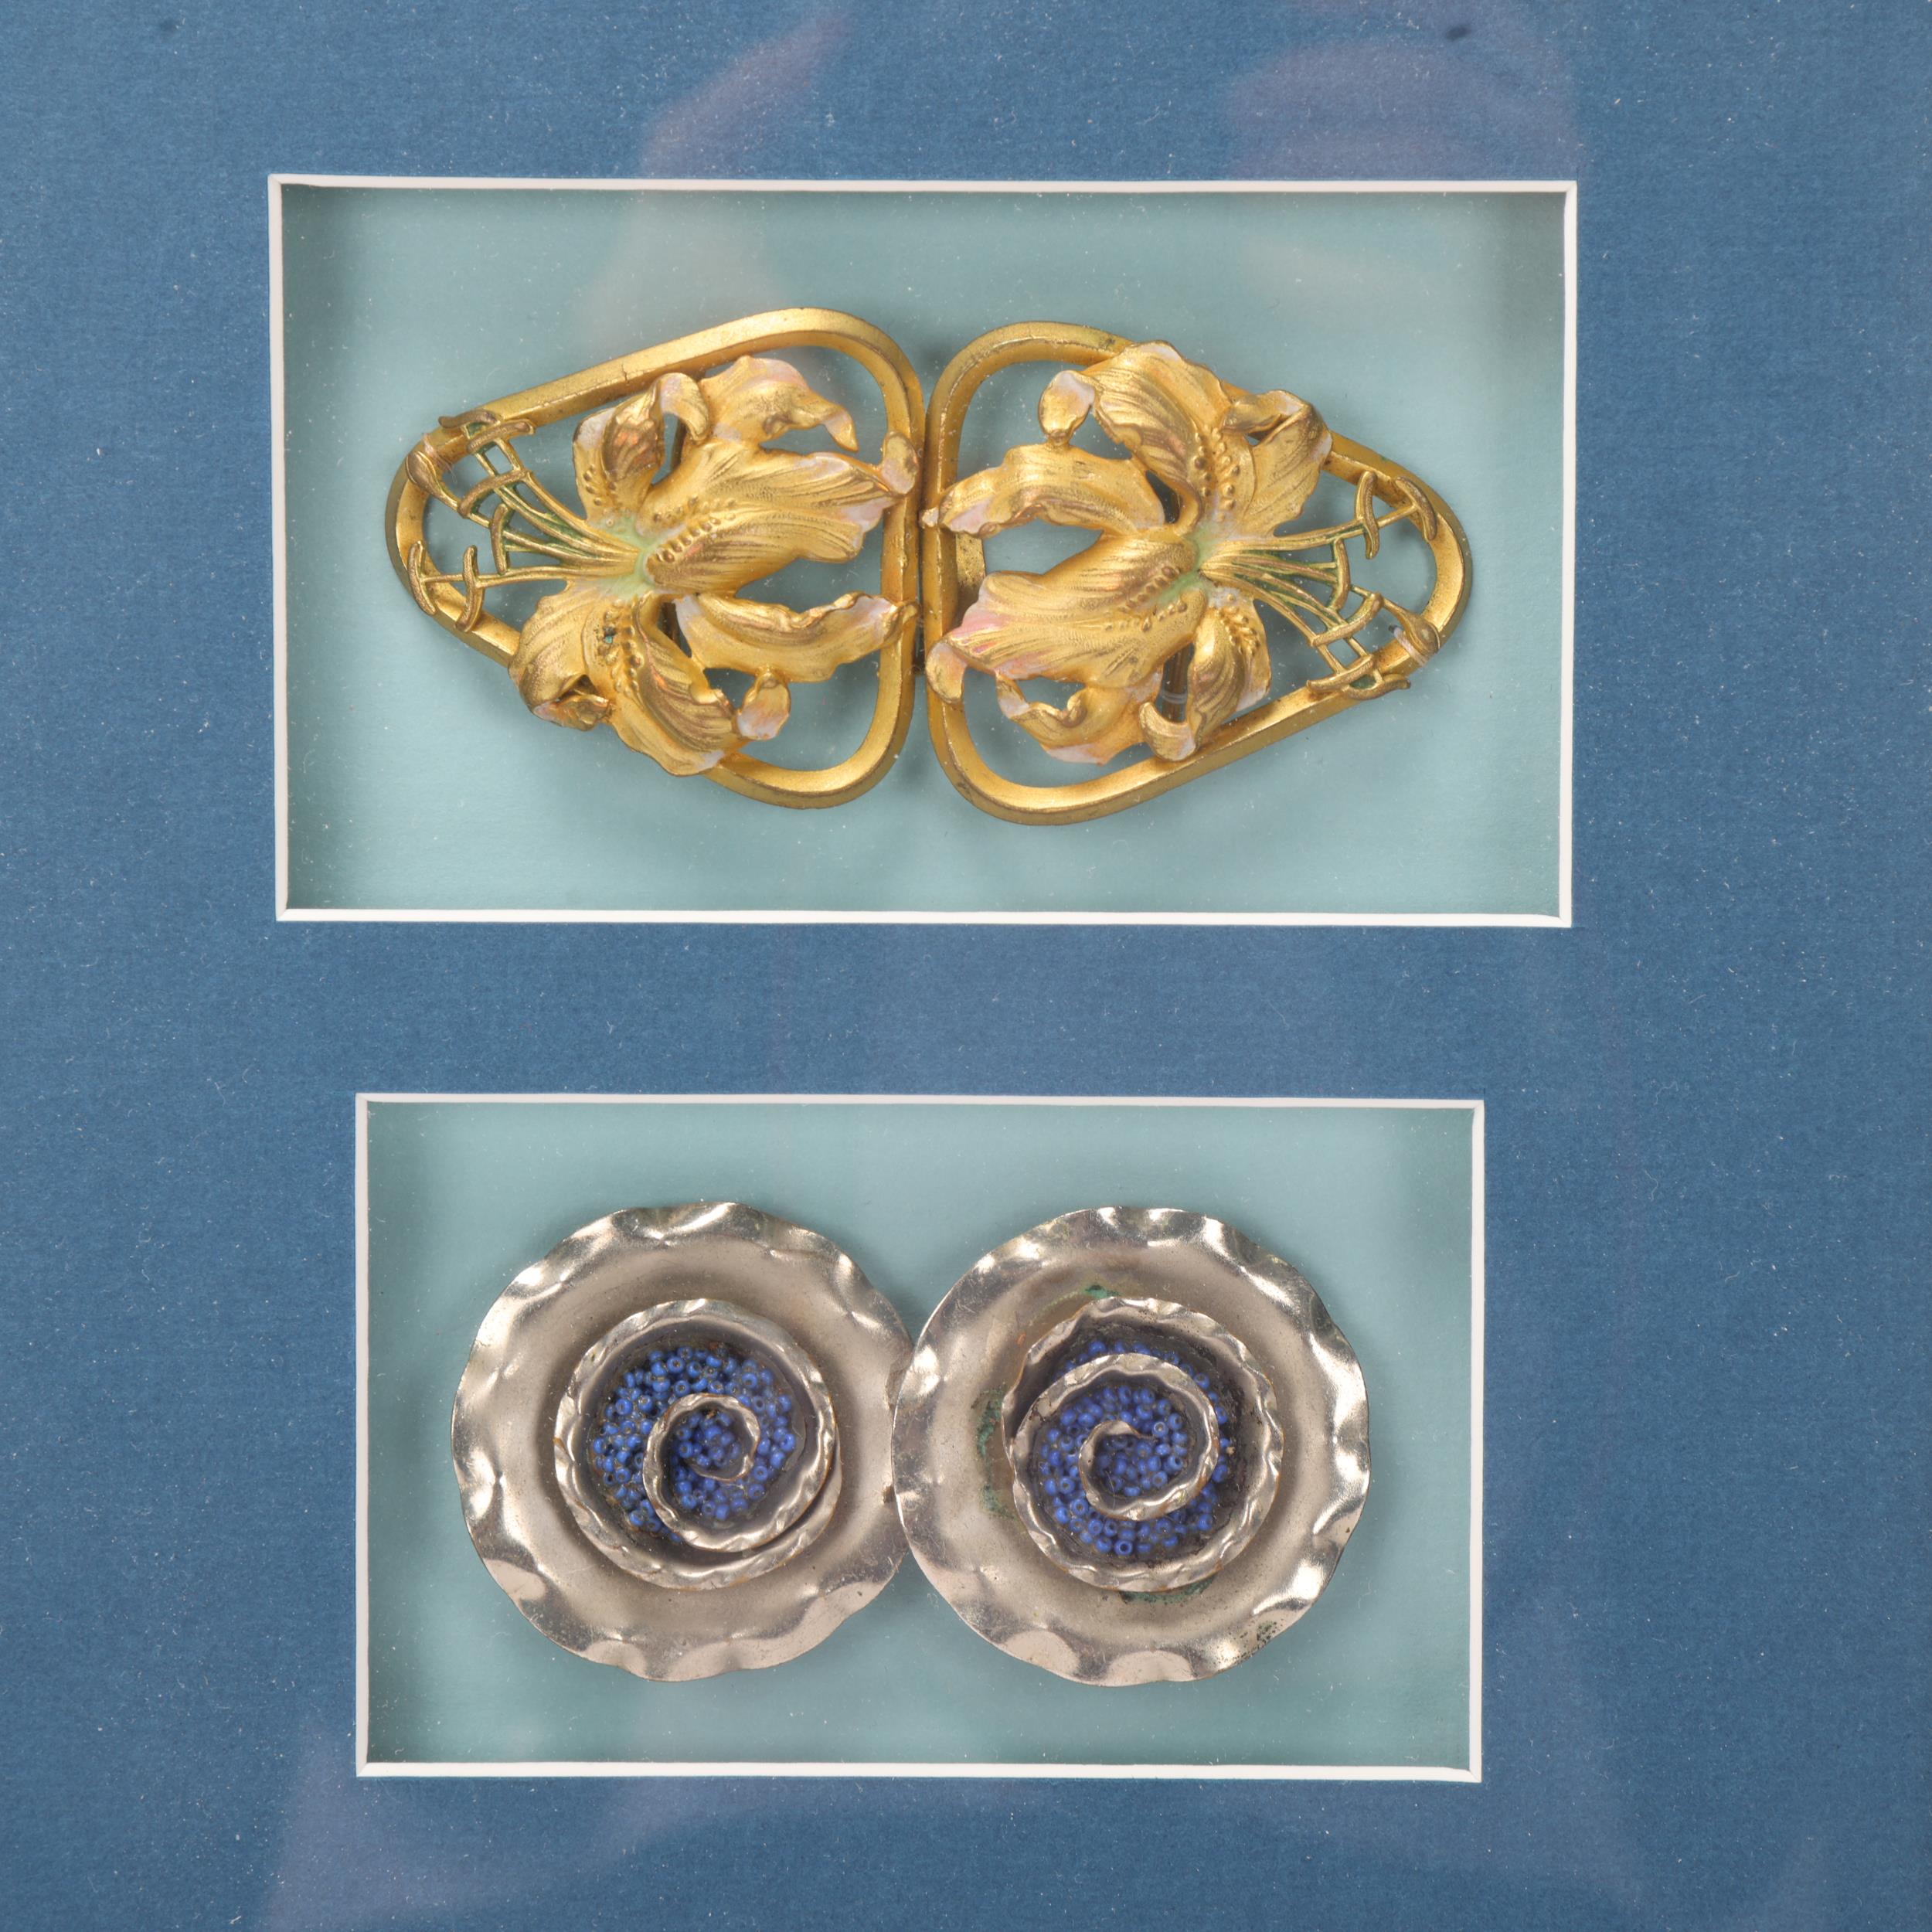 3 Art Nouveau buckles, mounted in good quality modern frame, overall frame dimensions 39.5cm x - Image 2 of 3